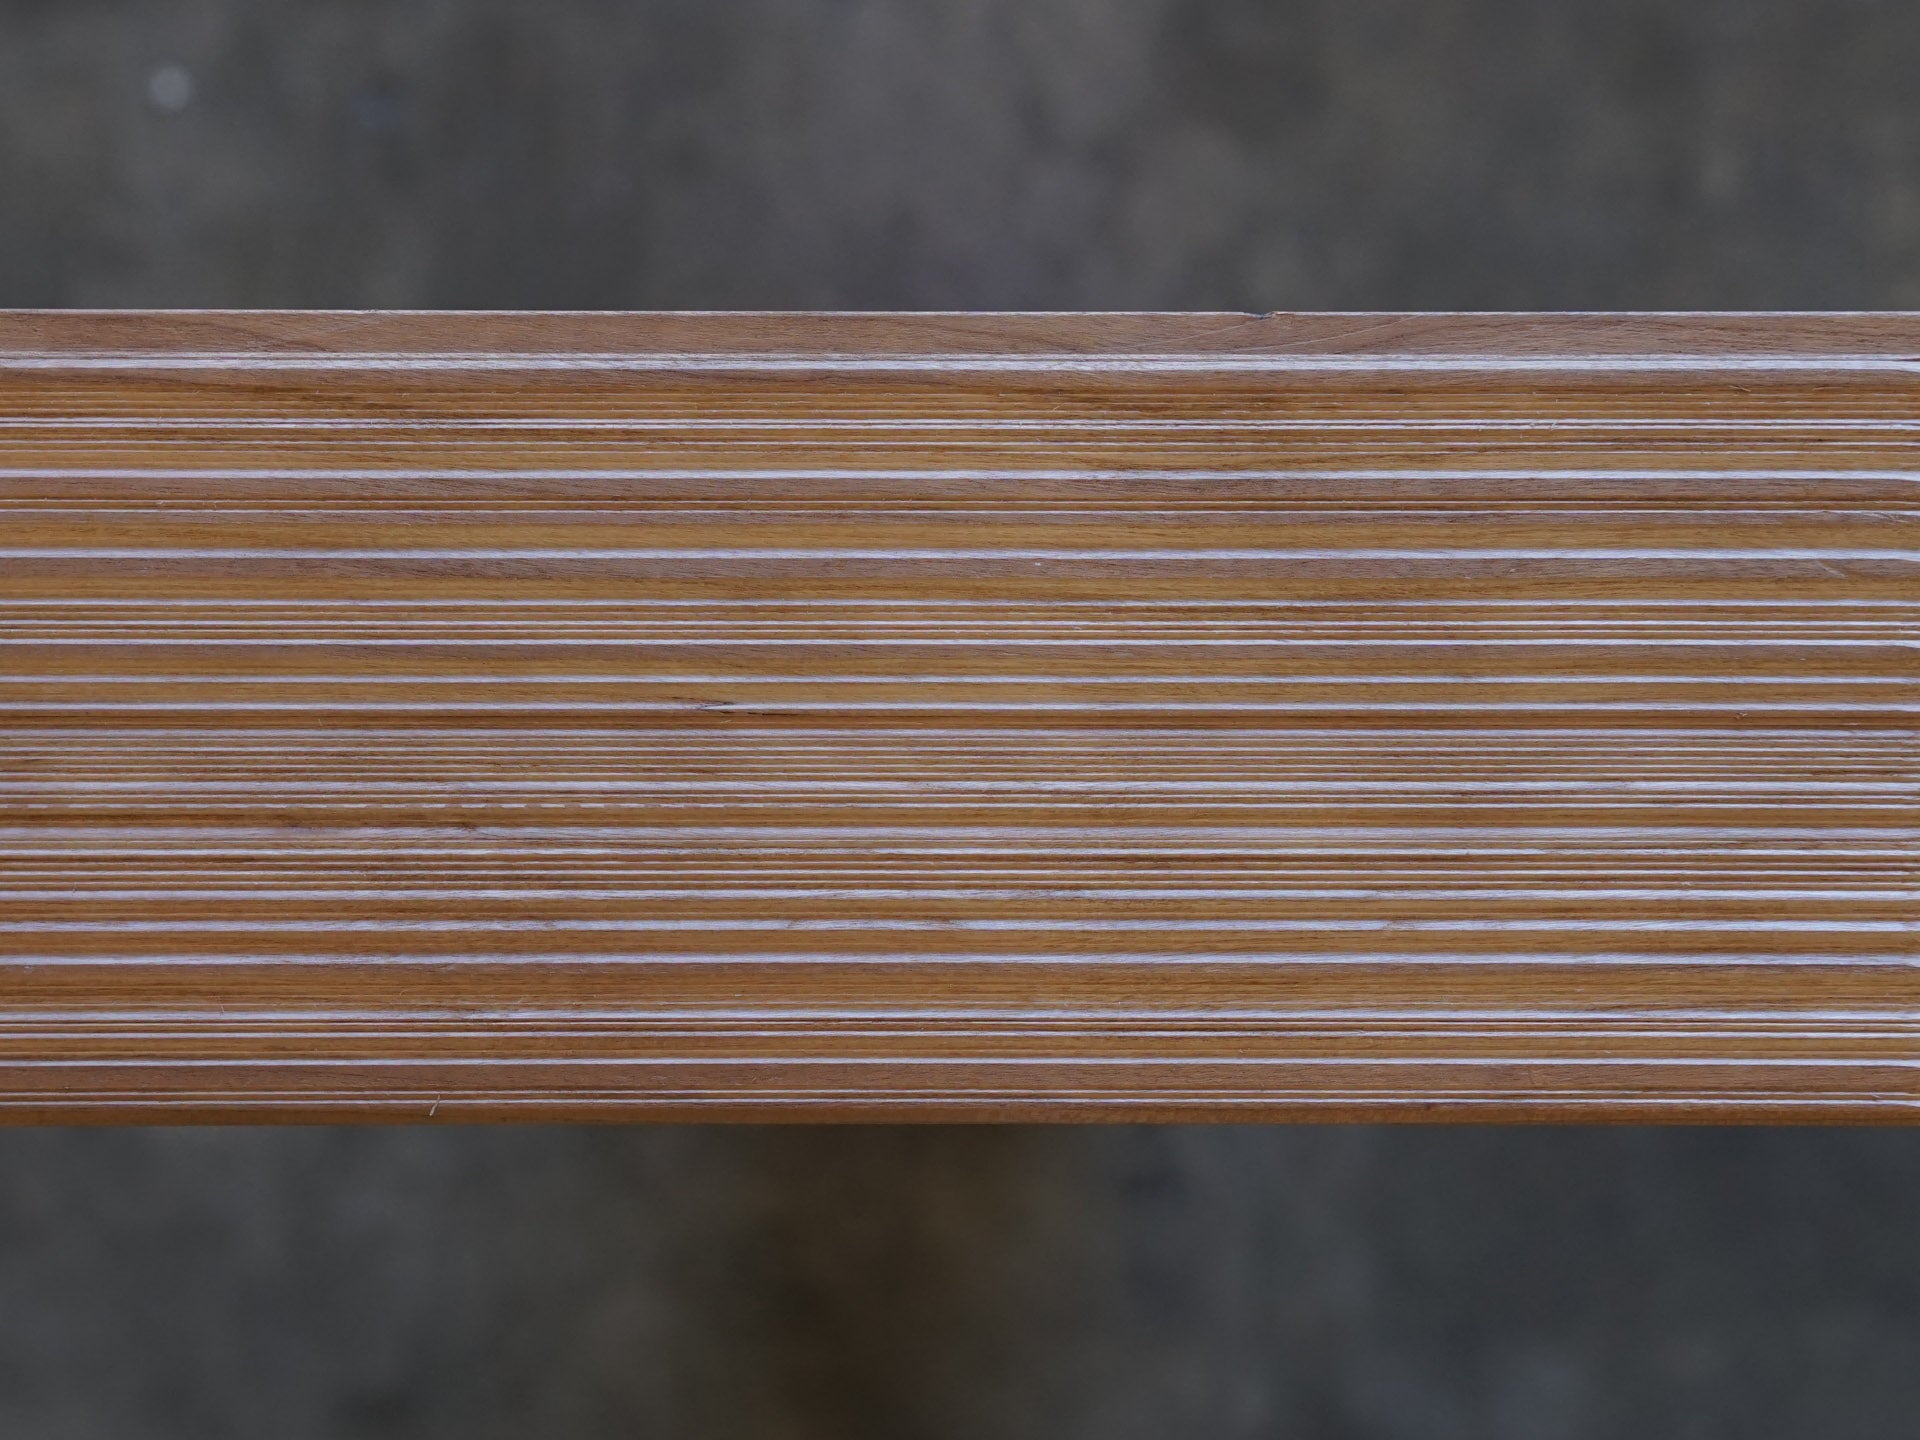 Top down photo of Weldtex tongue & groove cherry hardwood plank consisting of a combed, striated, brushed wood appearance common in mid-century modern homes and design